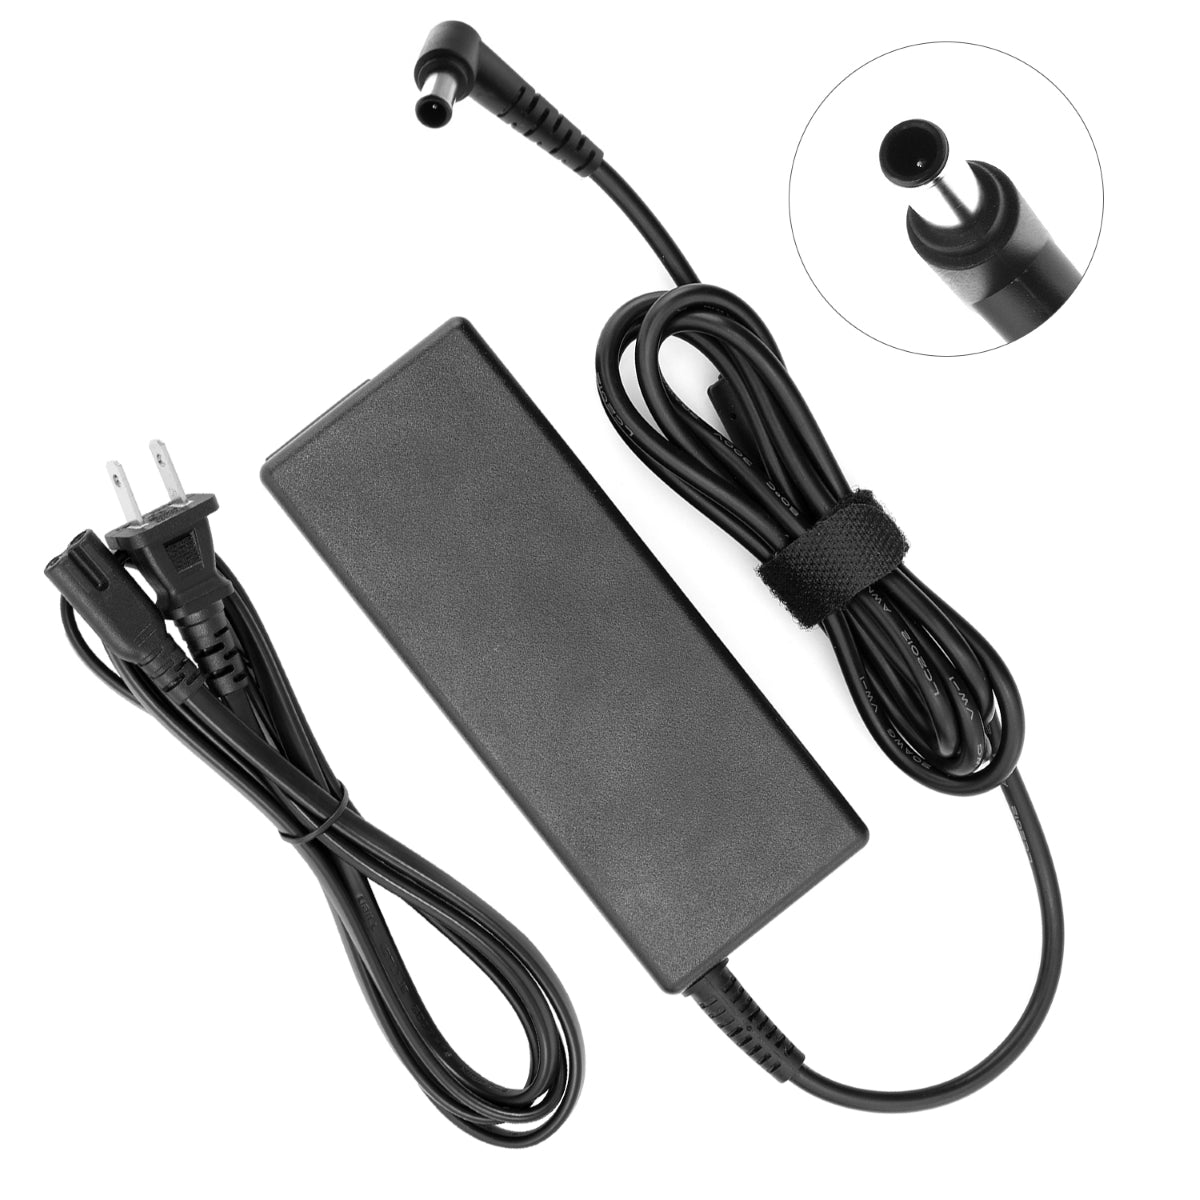 Power Adapter for LG 27GN800-B Monitor